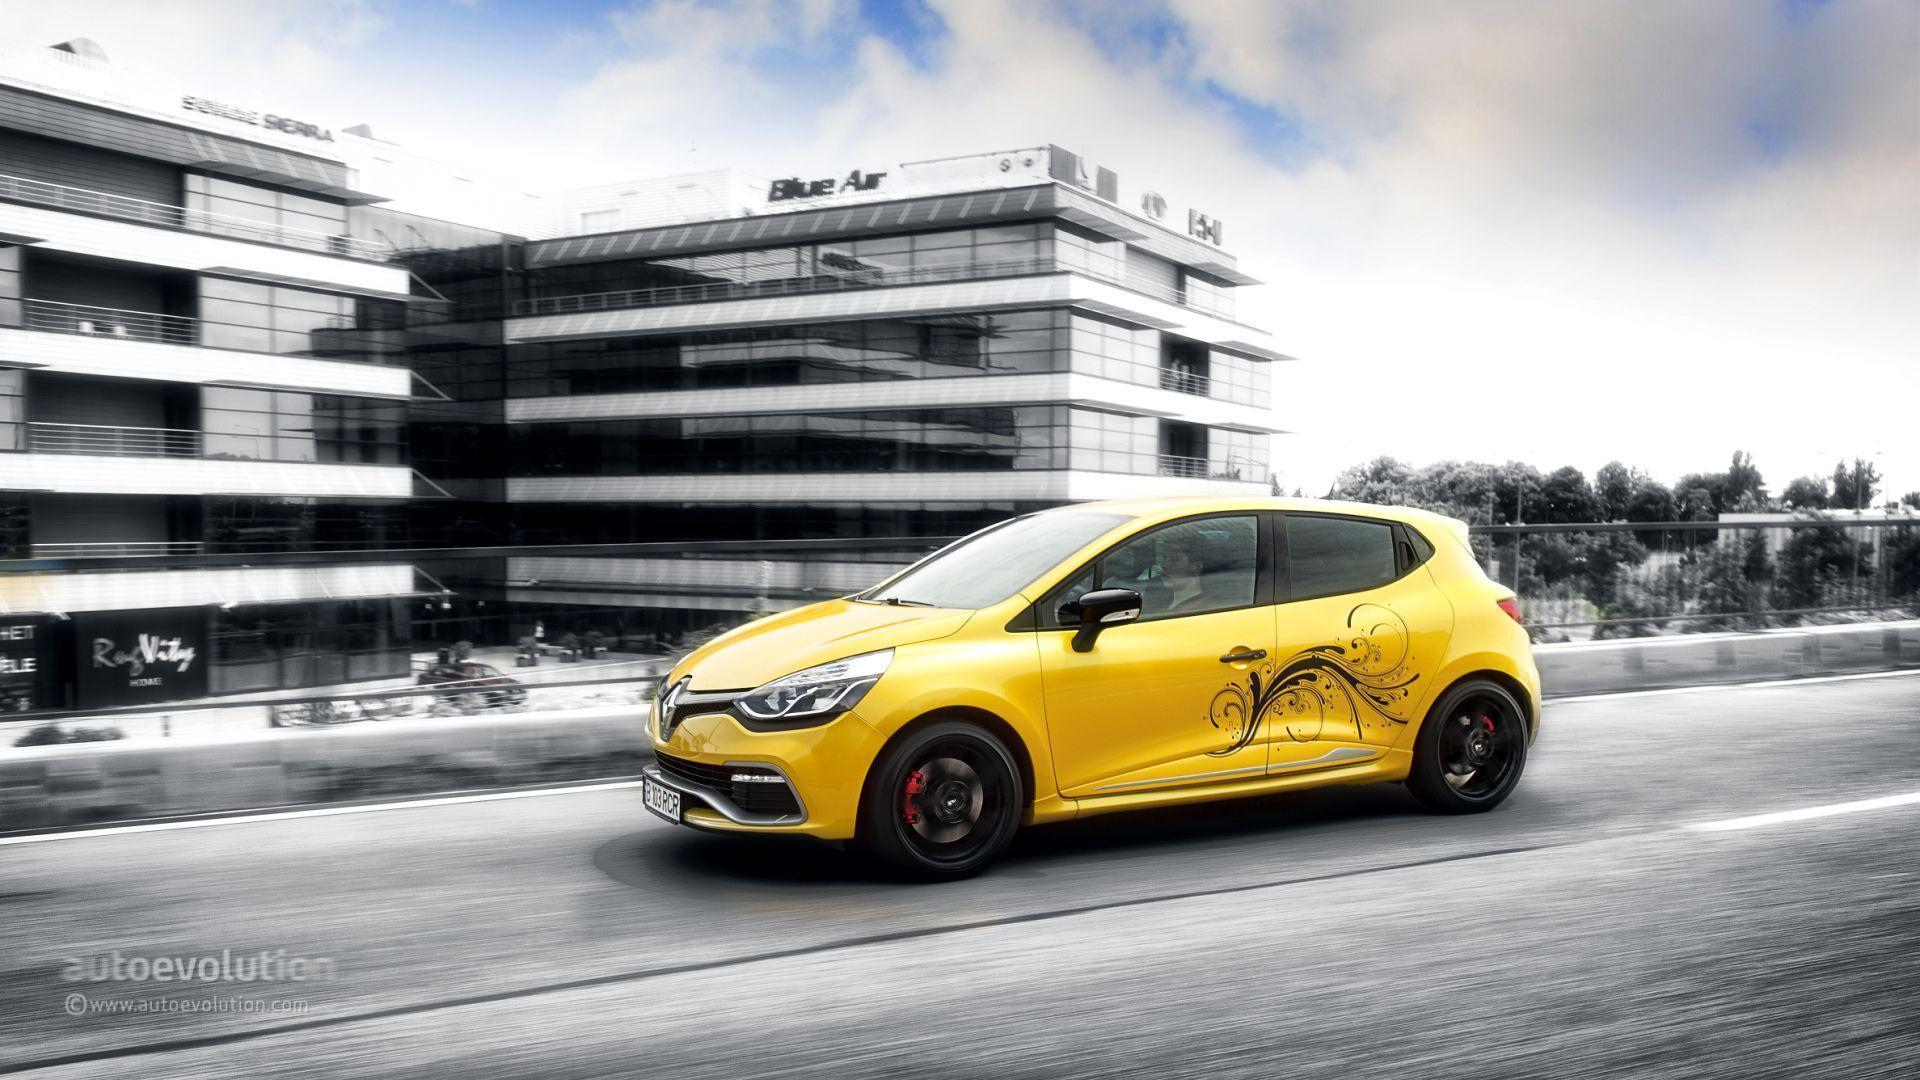 Renault Clio RS Turbo 2K Wallpapers